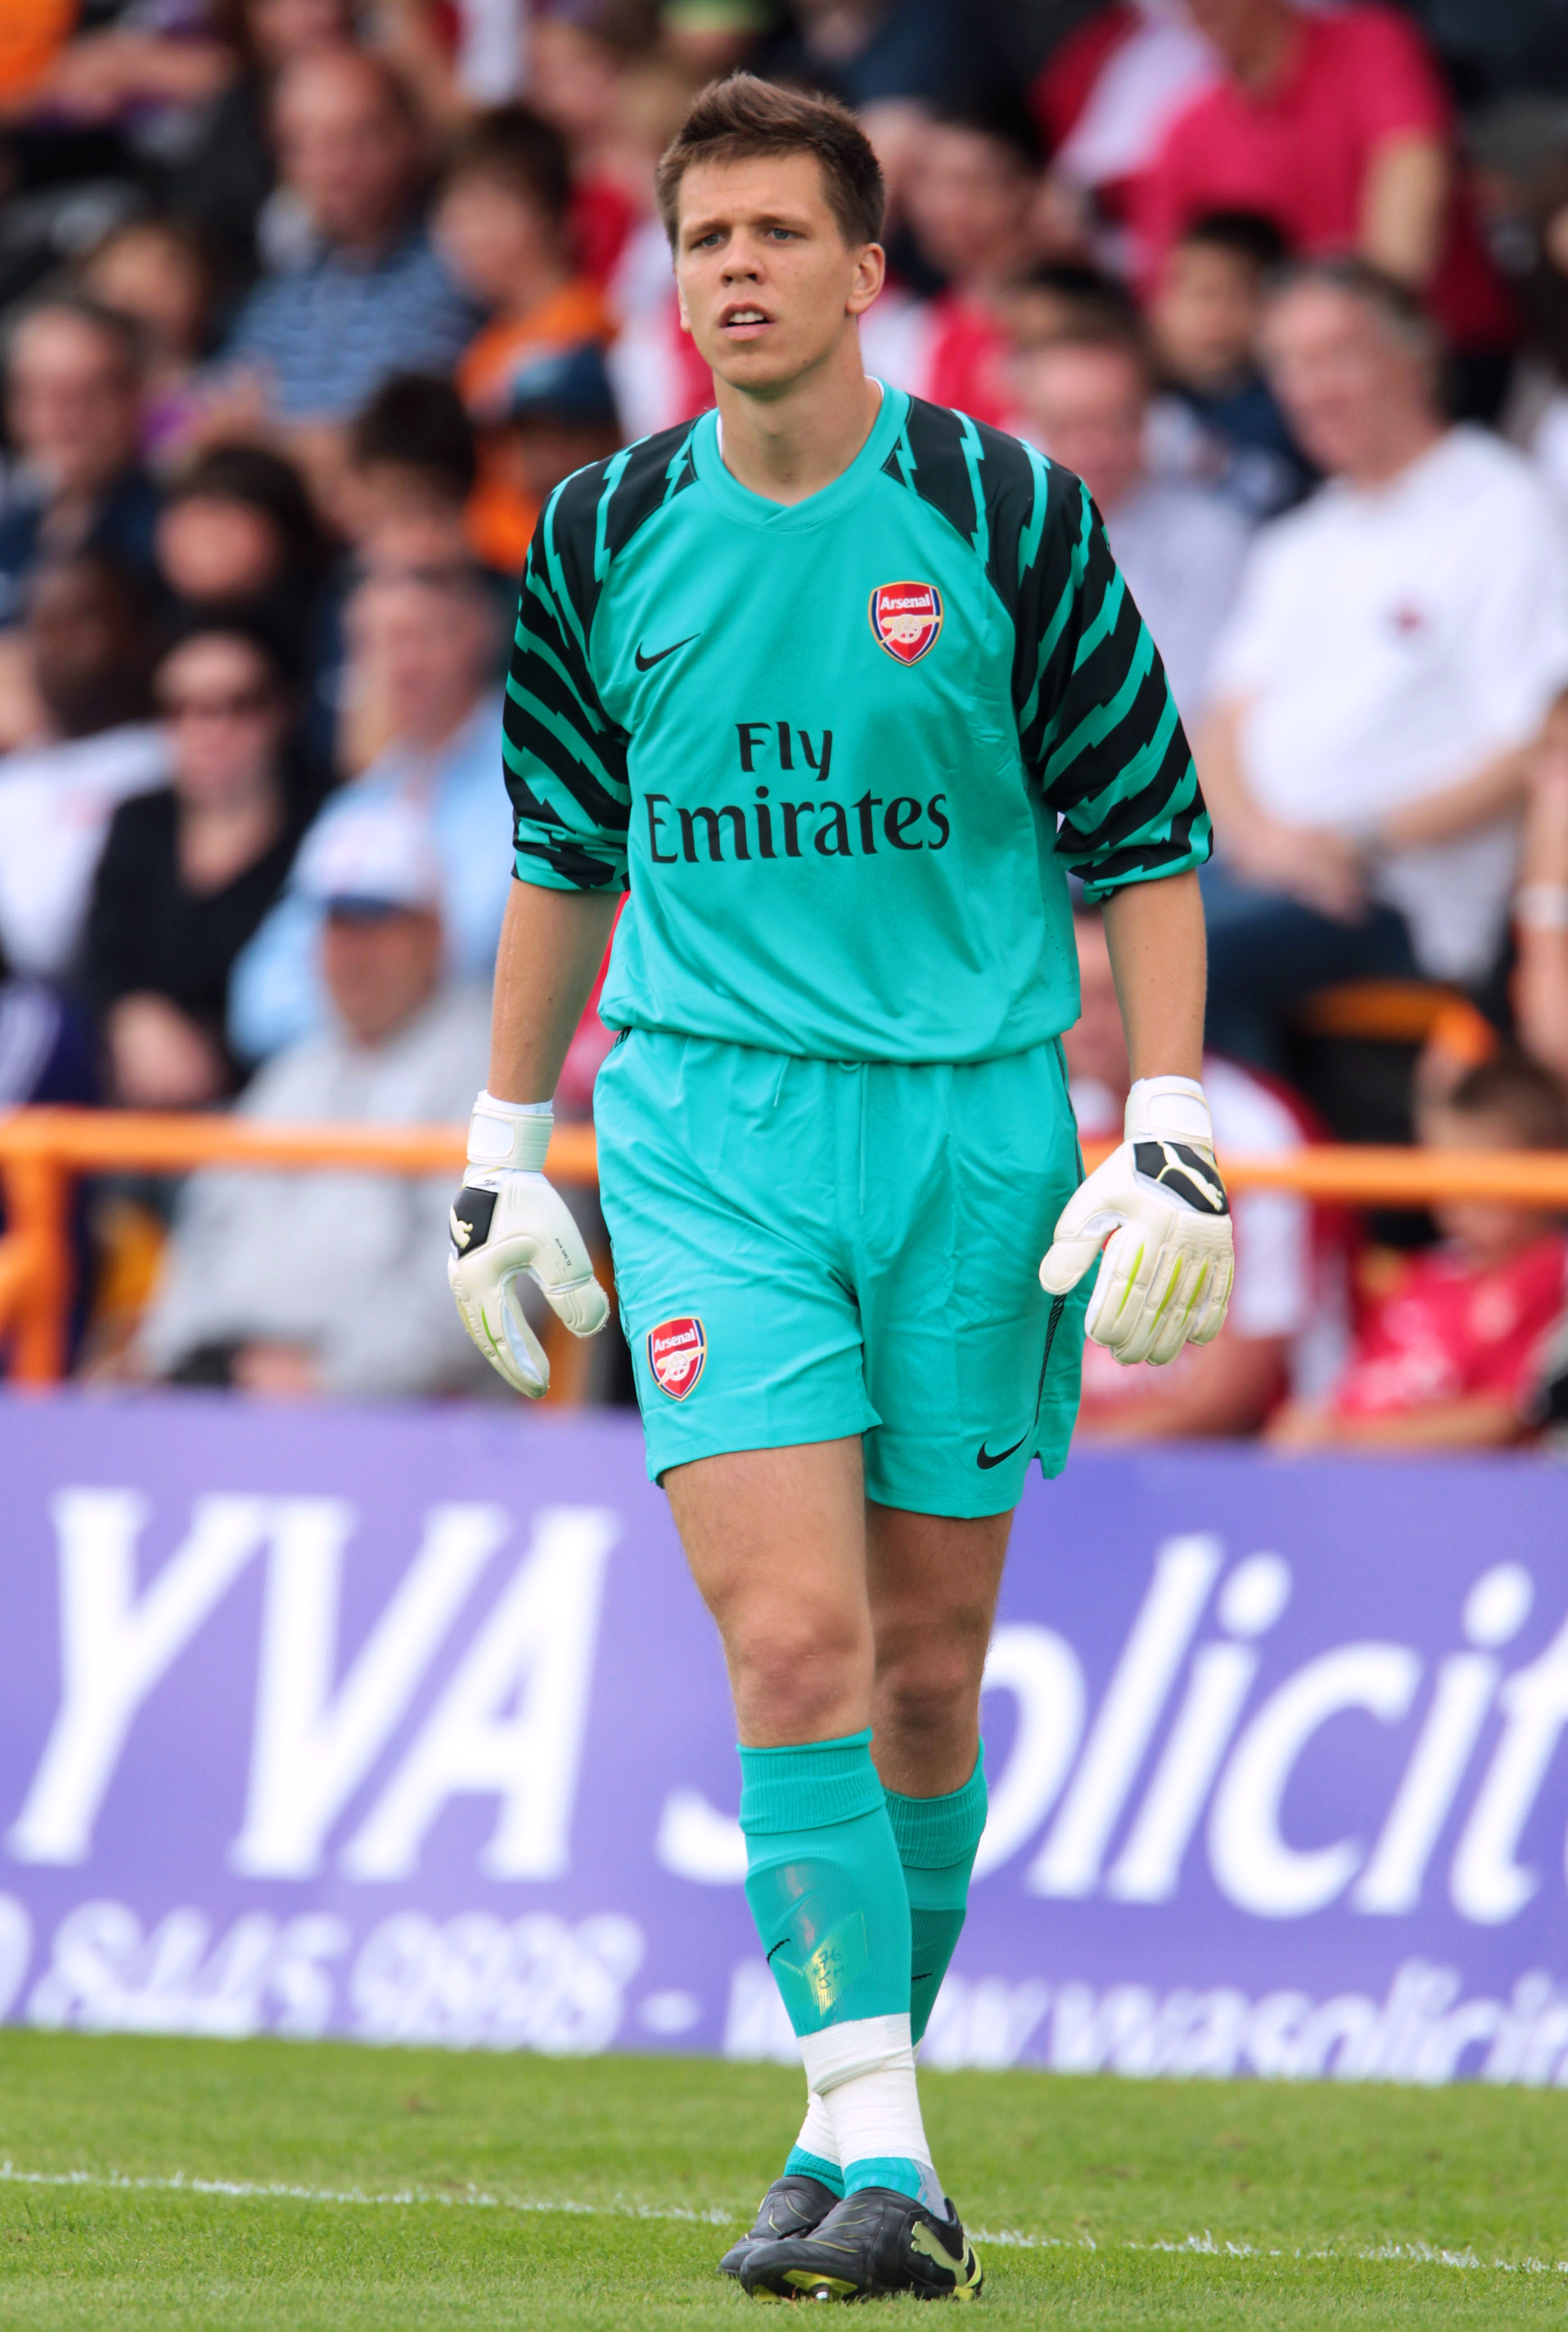 LONDON, ENGLAND - JULY 17:  Wojciech Szczesny of Arsenal looks on during the pre-season friendly match between Barnet and Arsenal at Underhill on July 17, 2010 in London, England.  (Photo by Phil Cole/Getty Images)